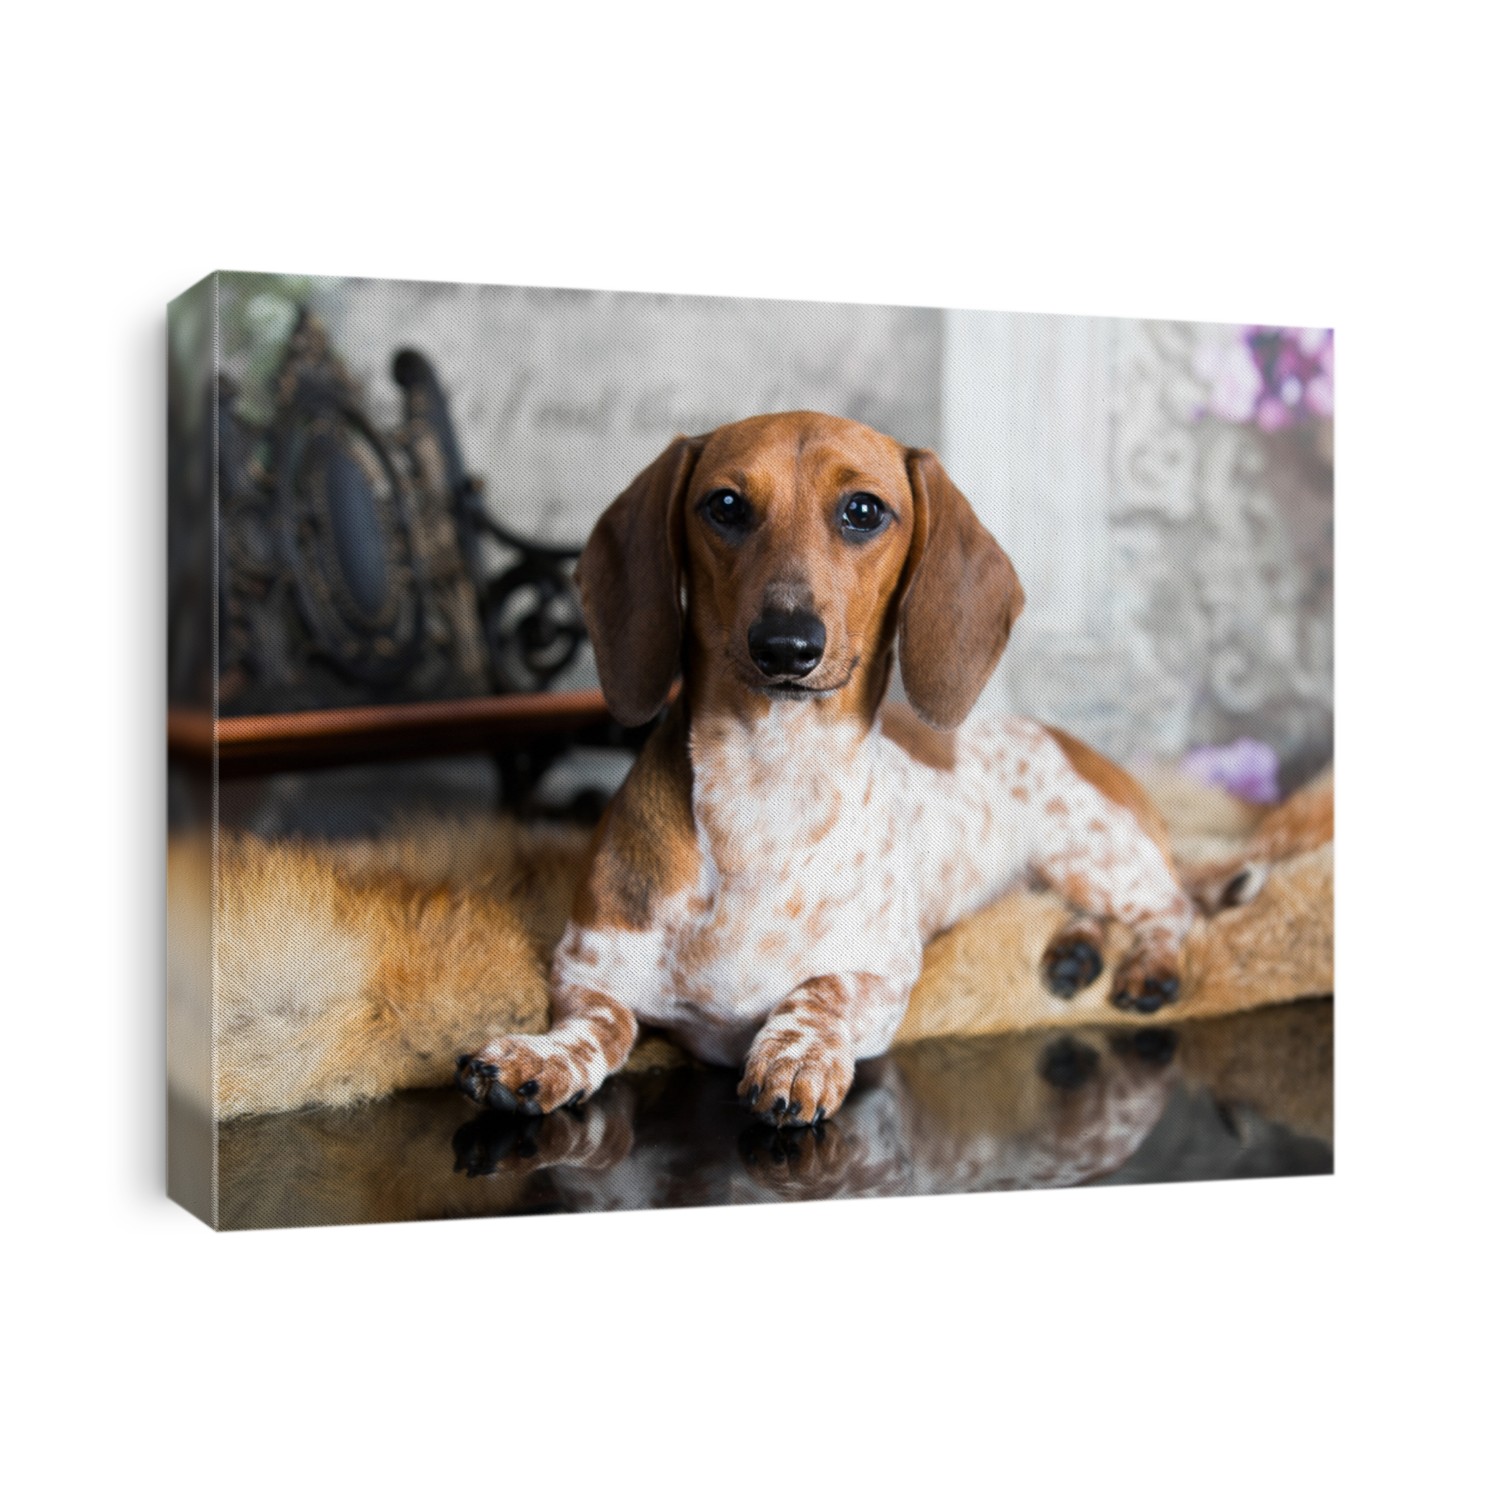 Dachshunds dog, rare color in the dog, Piebald